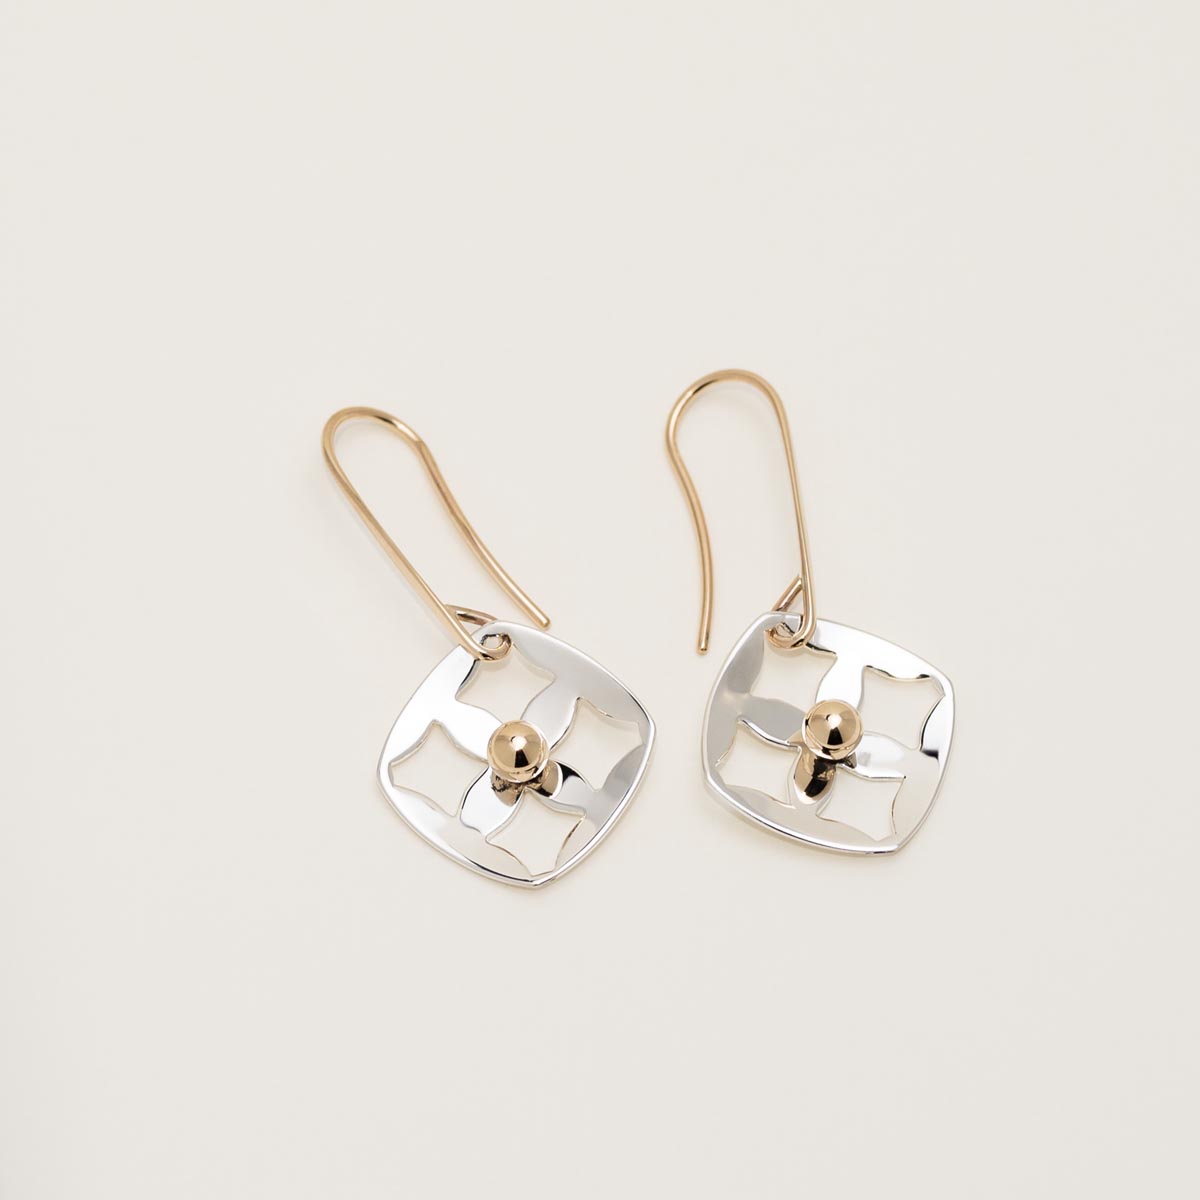 E.L. Designs Pointelle Drop Earrings in Sterling Silver and 14kt Yellow Gold